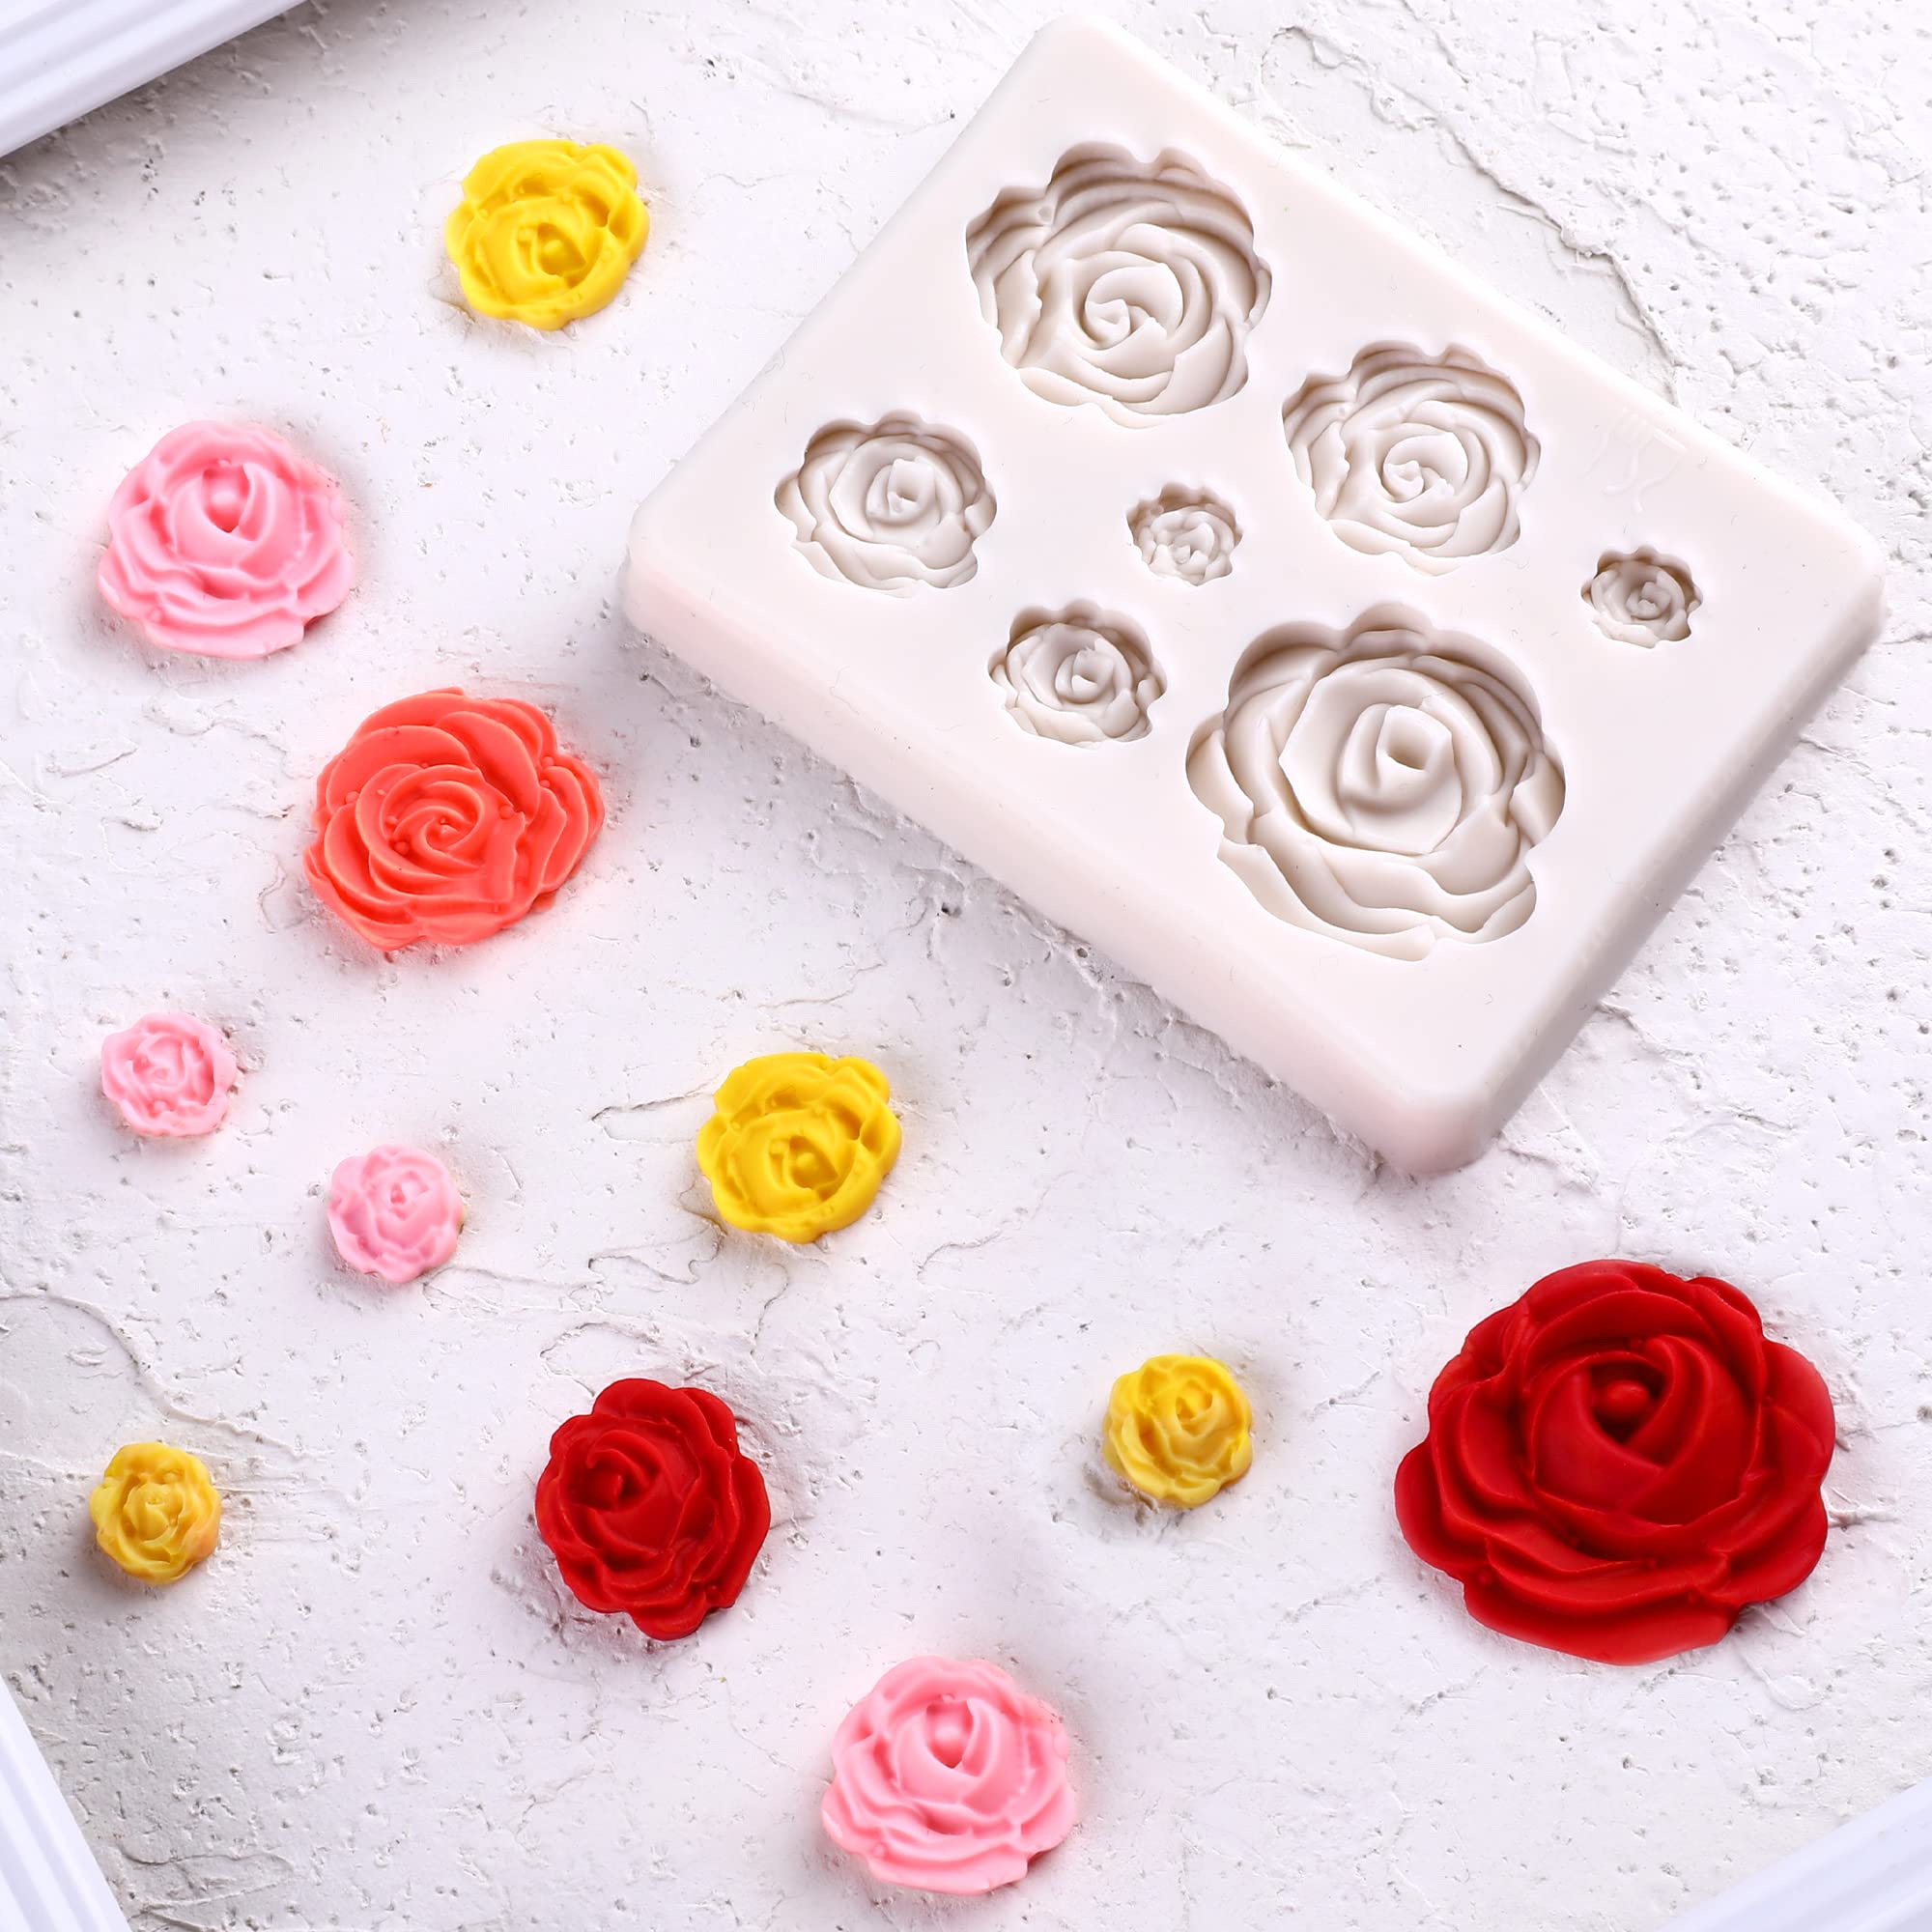 Flower Polymer Clay Molds, Silicone Flower Molds Daisy Clay Molds